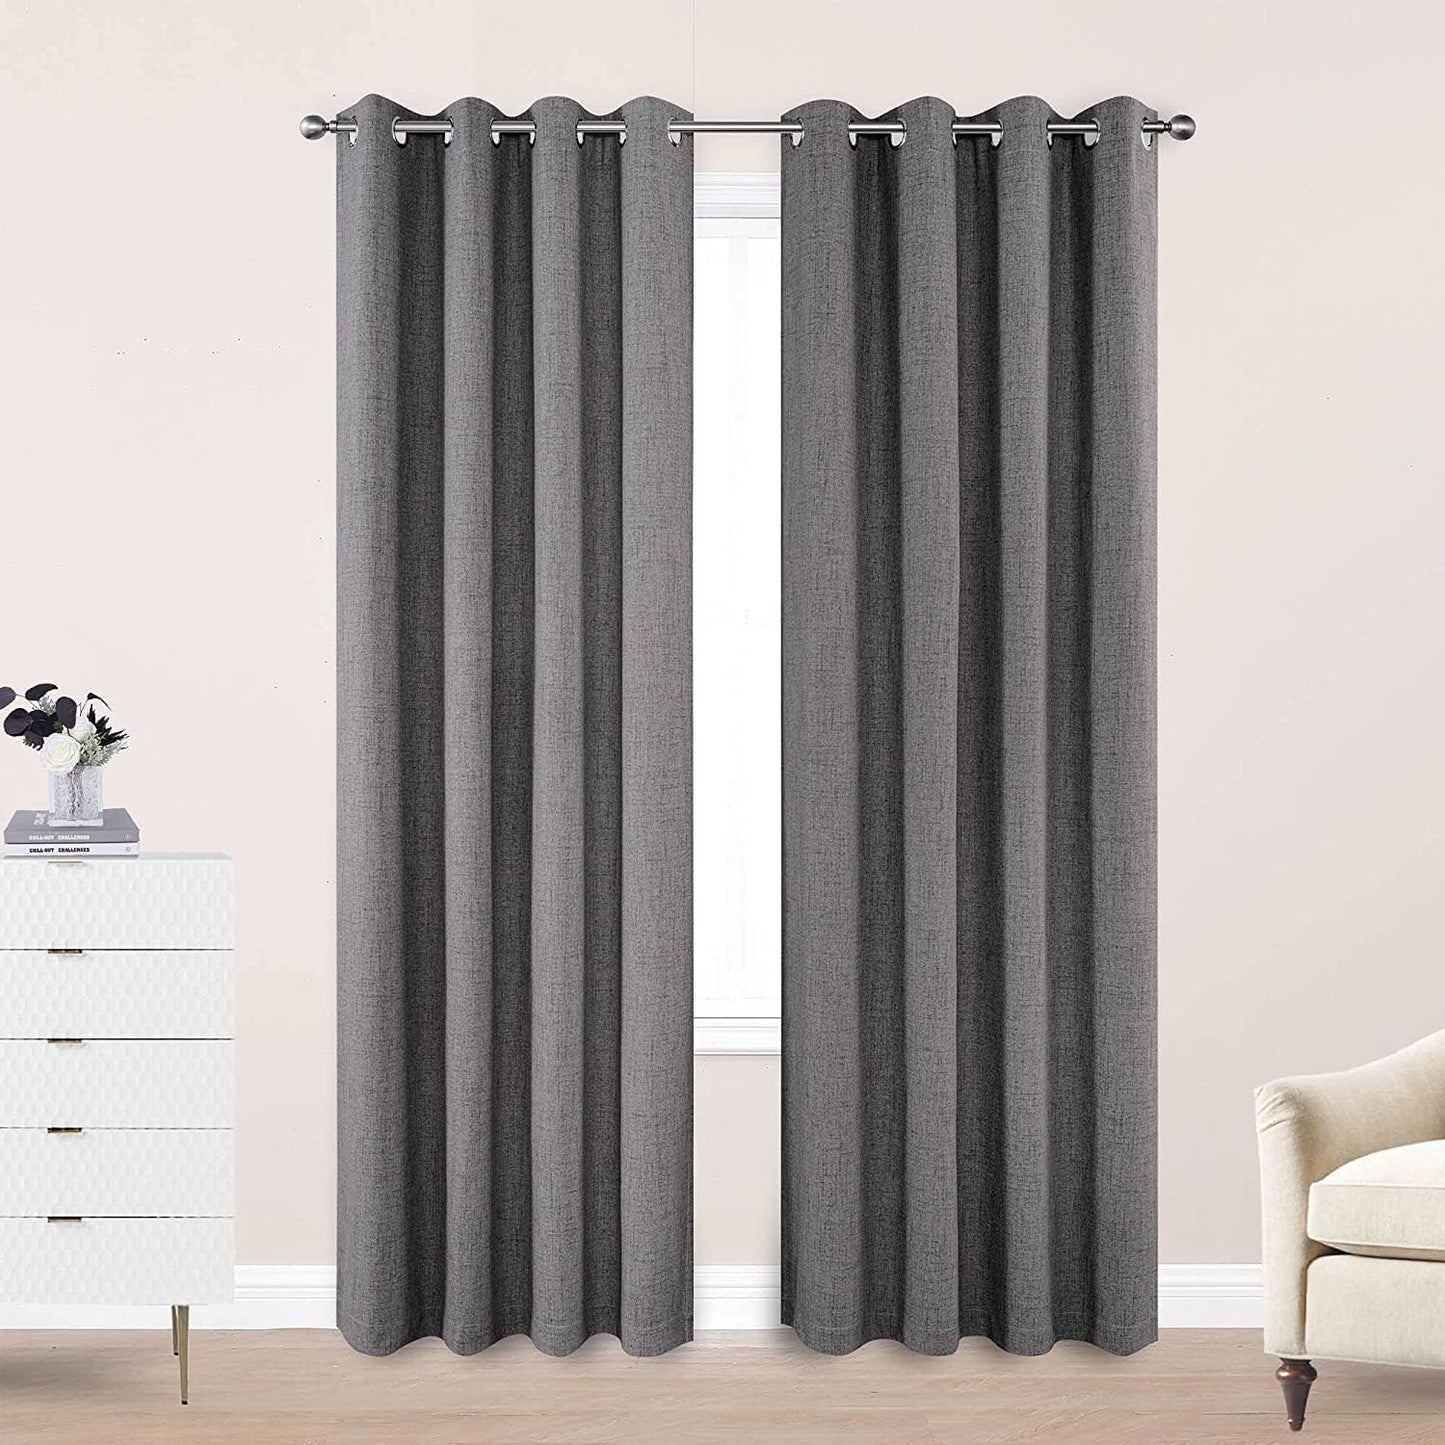 CUCRAF 100% Blackout Window Curtains for Bedroom Noise Reducing,Thermal Insulated Room Darkening Grommet Drapes for Living Room,2 Panels Sets(52 X 95 Inches, Light Khaki)  CUCRAF Grey 52 X 90 Inches 